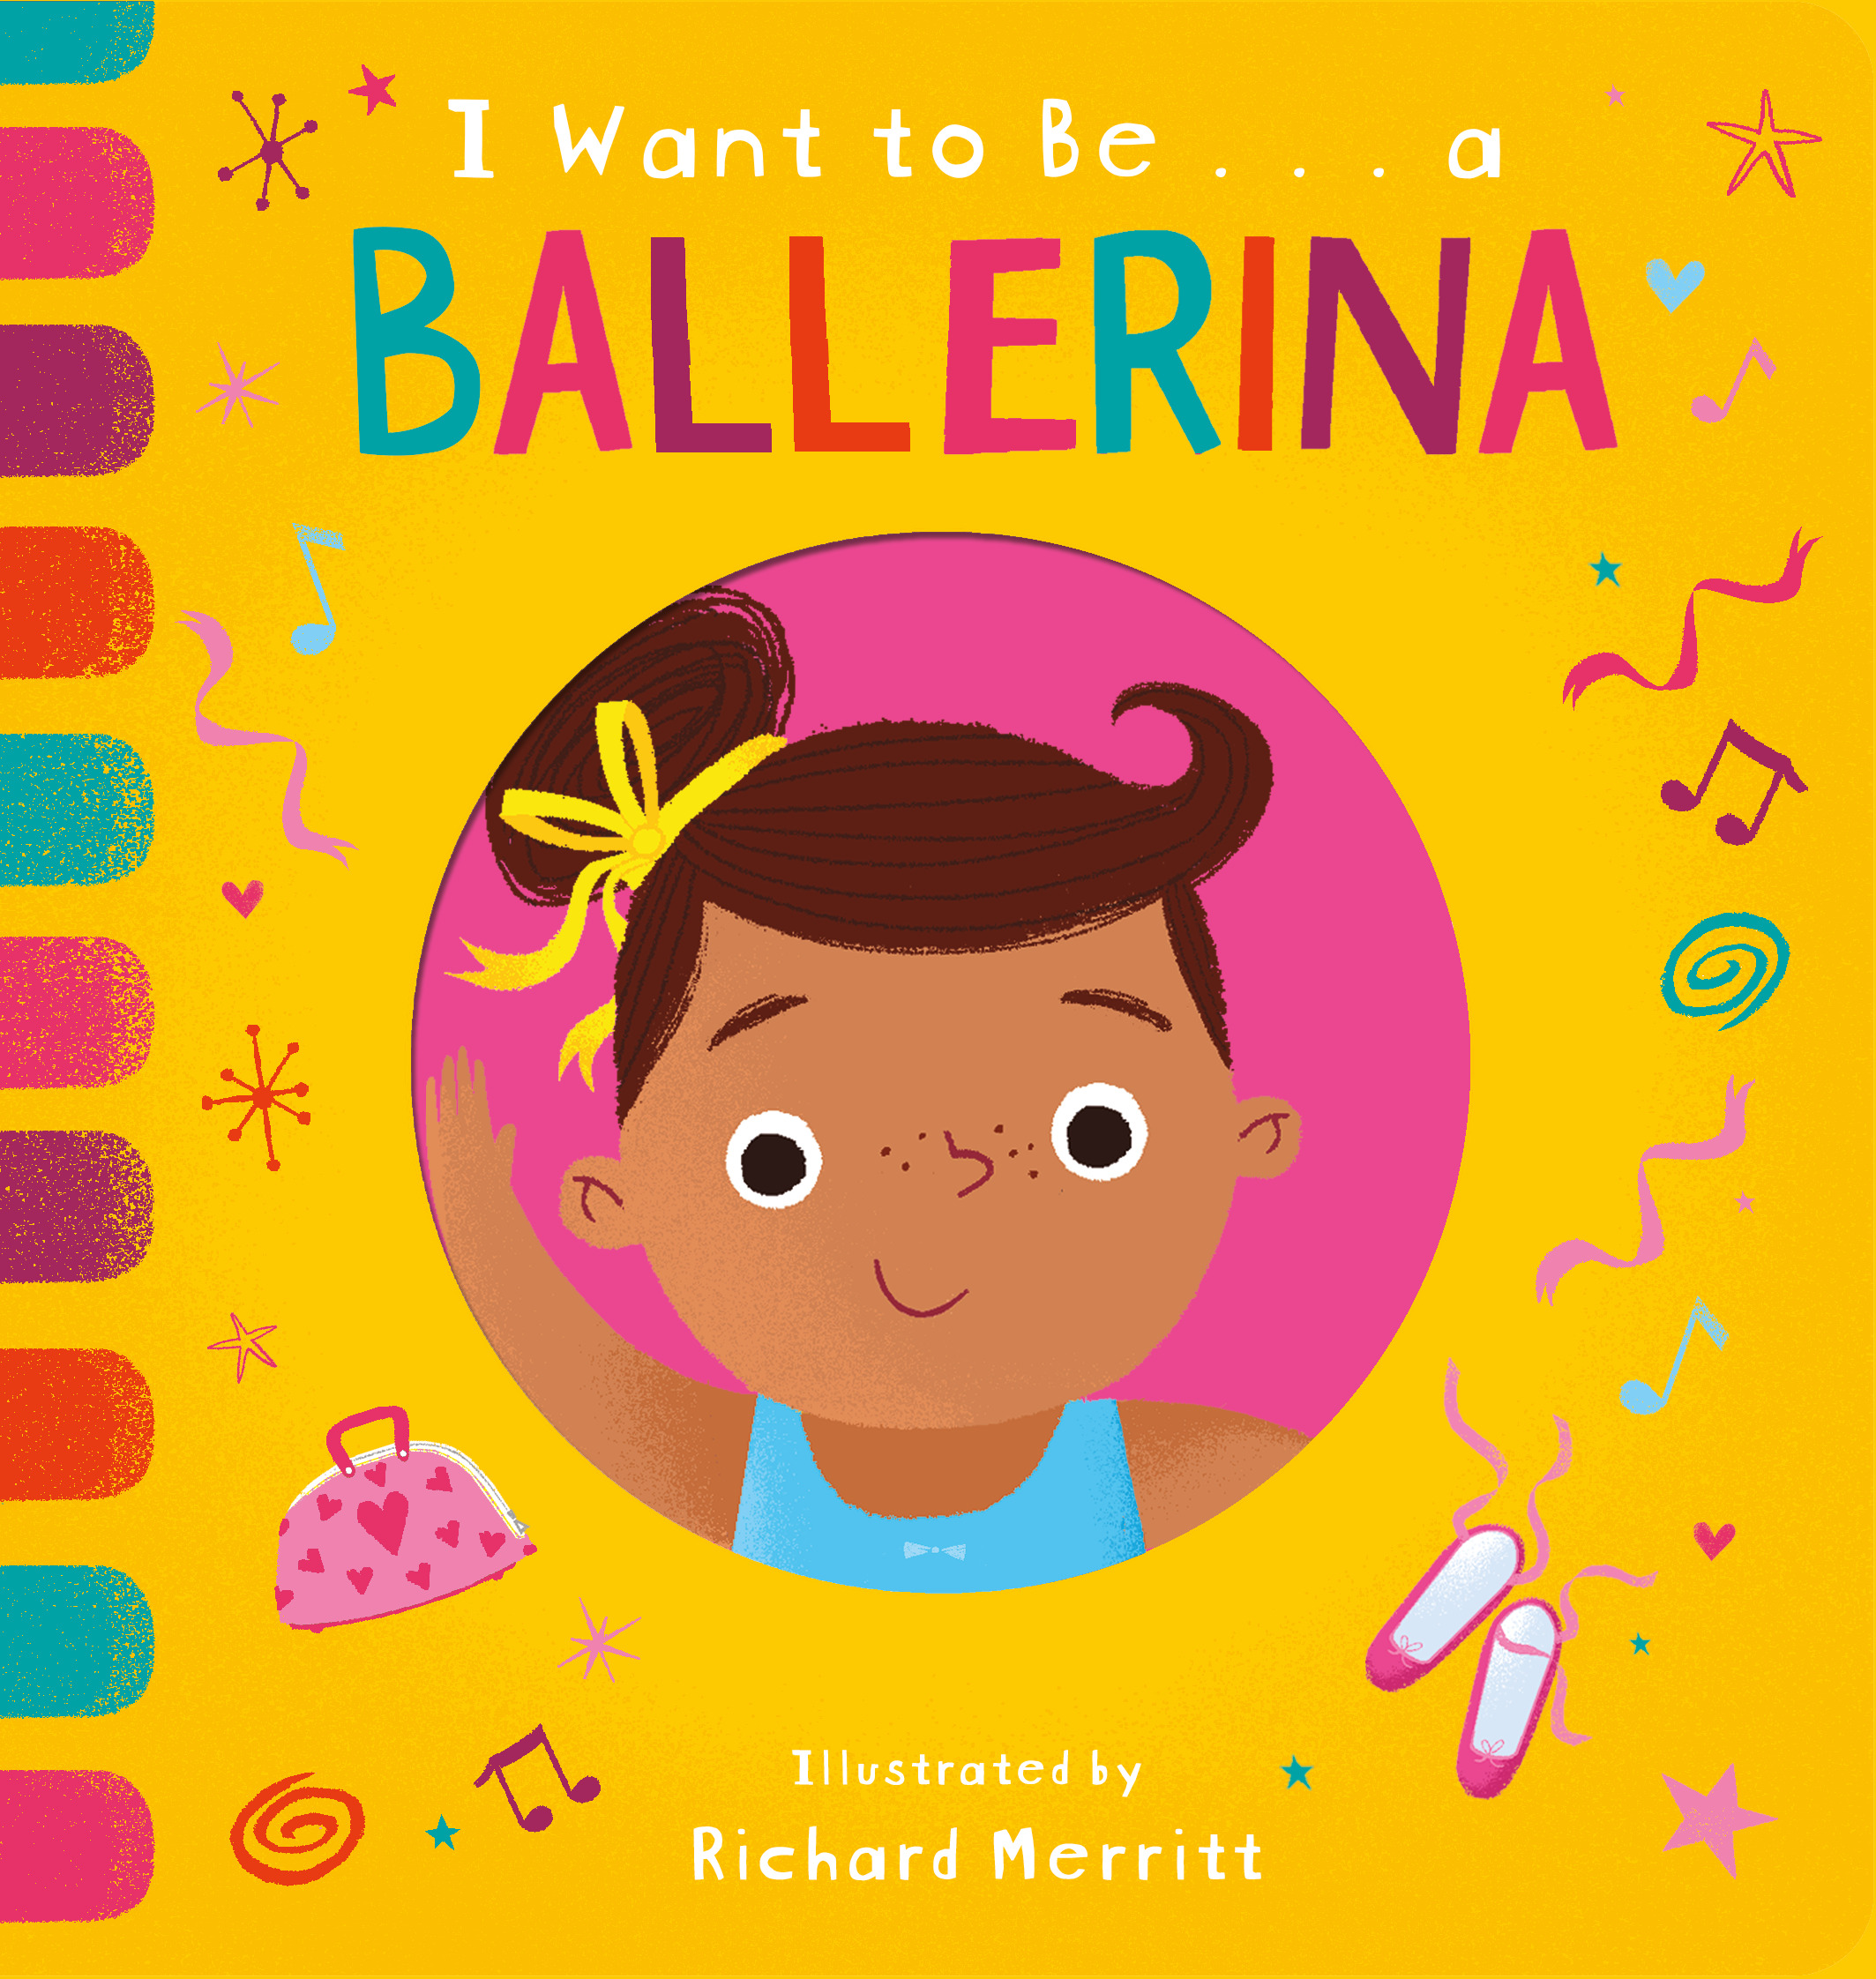 I Want to Be...a Ballerina | Picture & board books